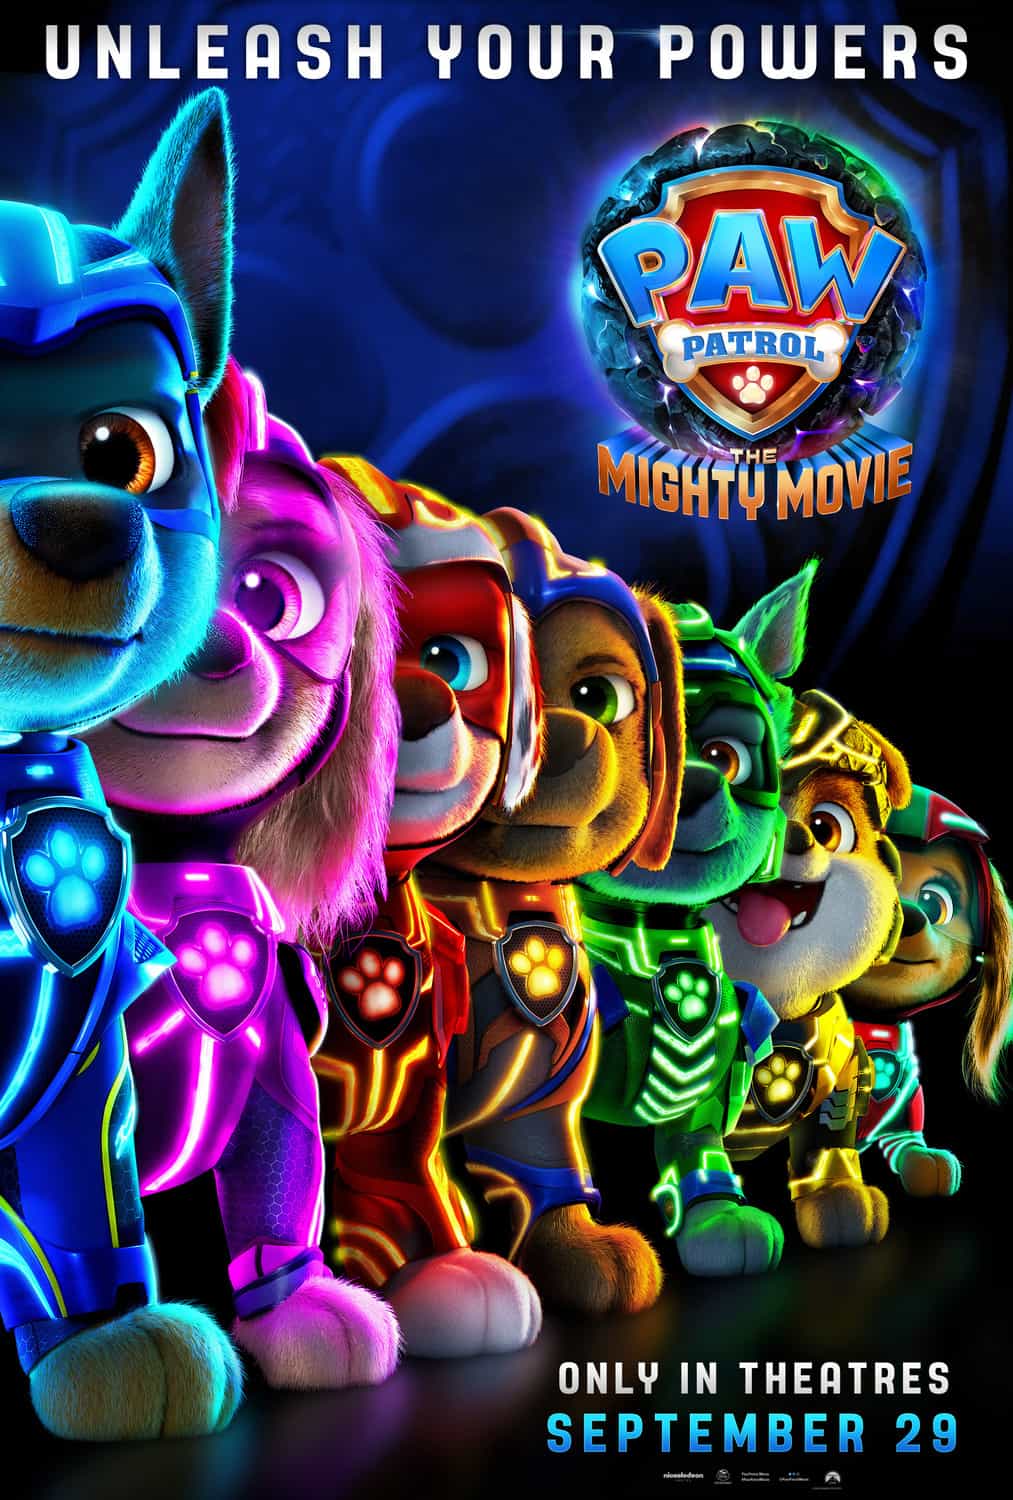 Paw Patrol: The Mighty Movie has been given a U age rating in the UK for very mild threat, violence, rude humour, upsetting scenes